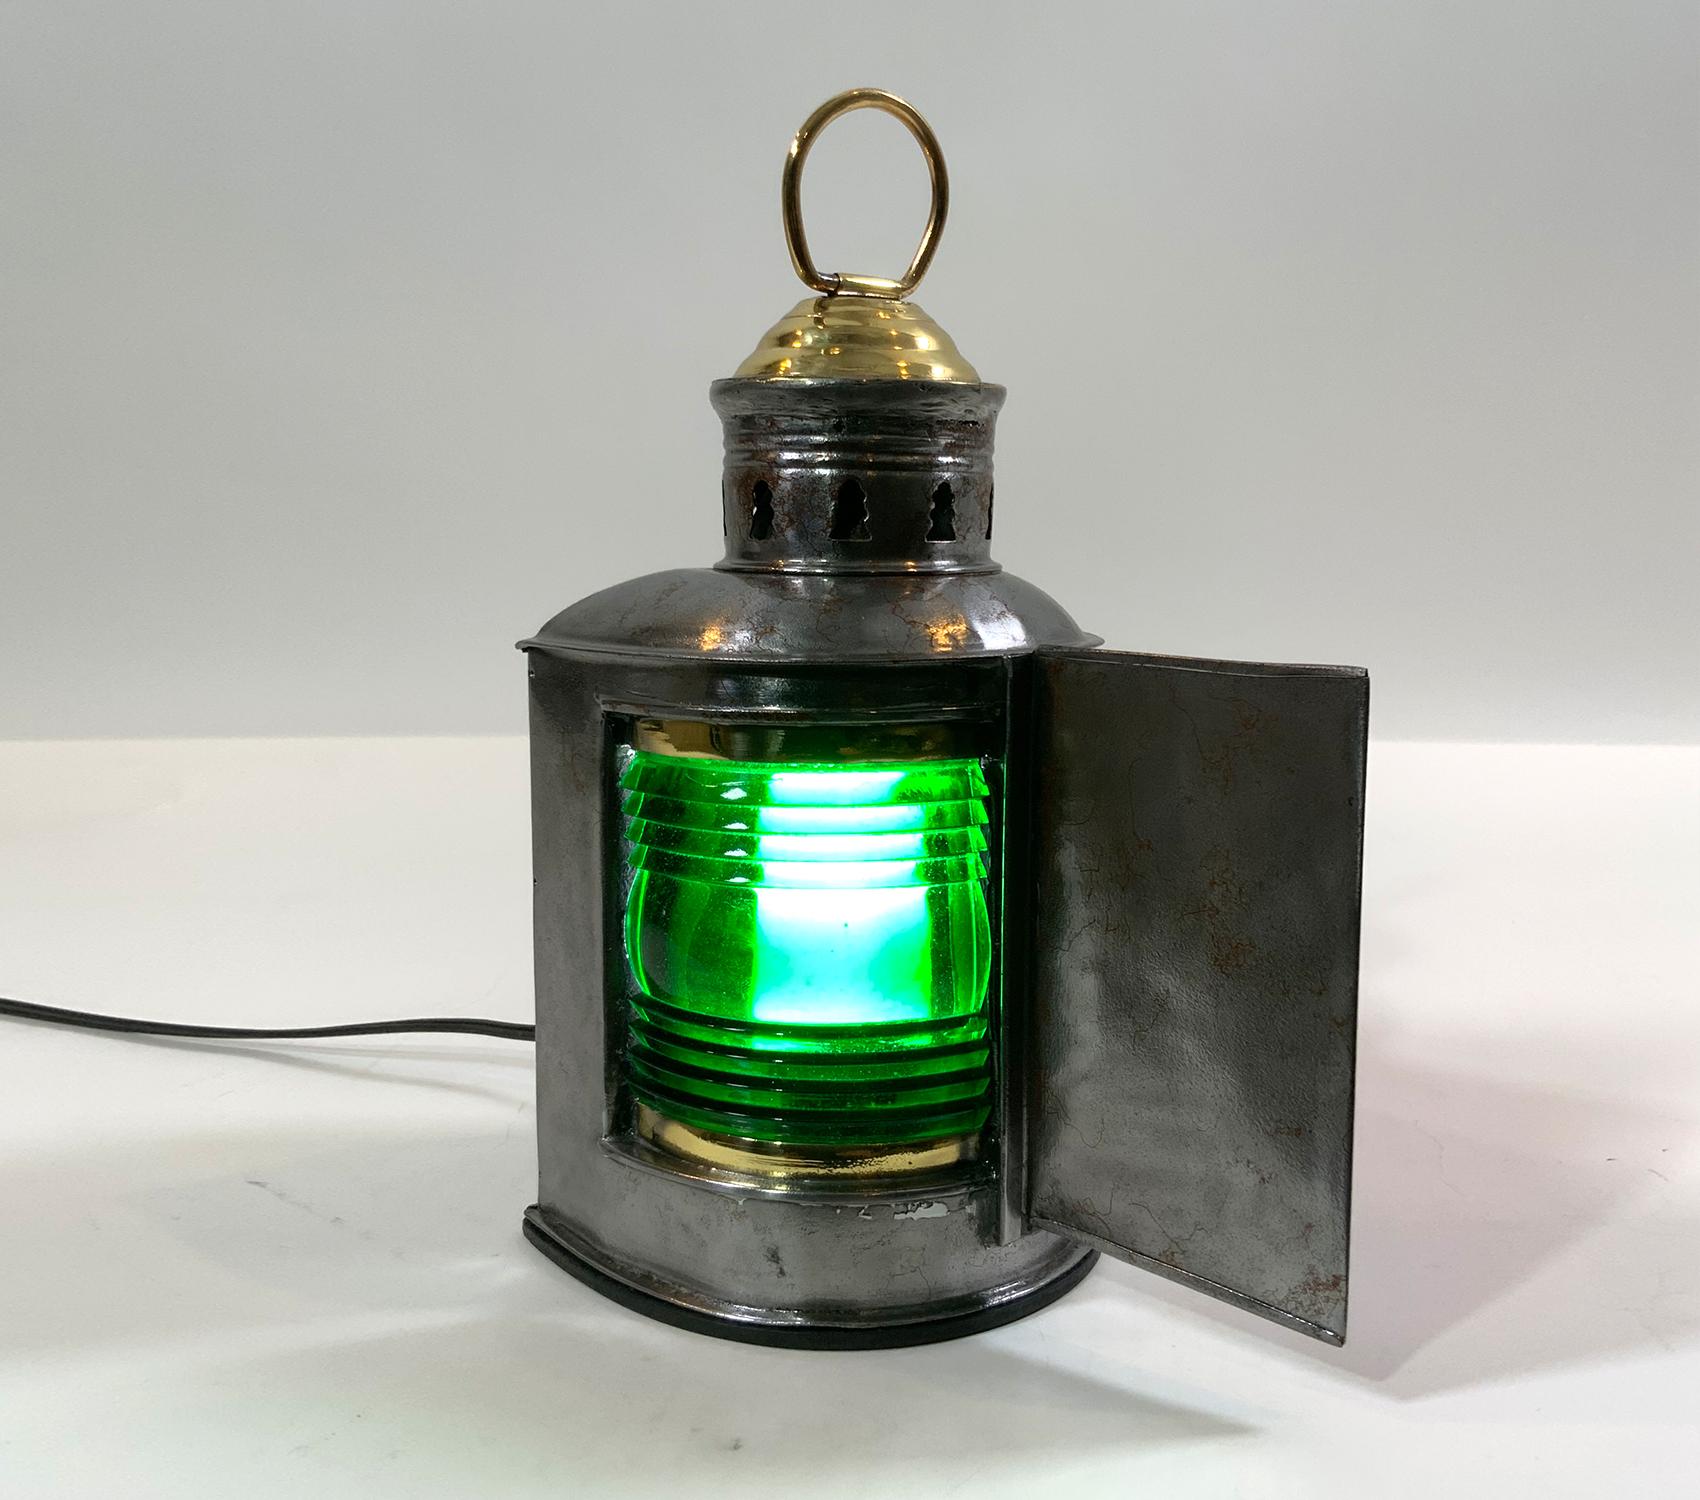 Steel boat bow lantern. Glass Fresnel lens in red and green. Steel case with brass cap. Also fitted with a carry ring. Wired with an electric socket for home use.

Weight: 2 LBS
Overall dimensions: 9” H x 5